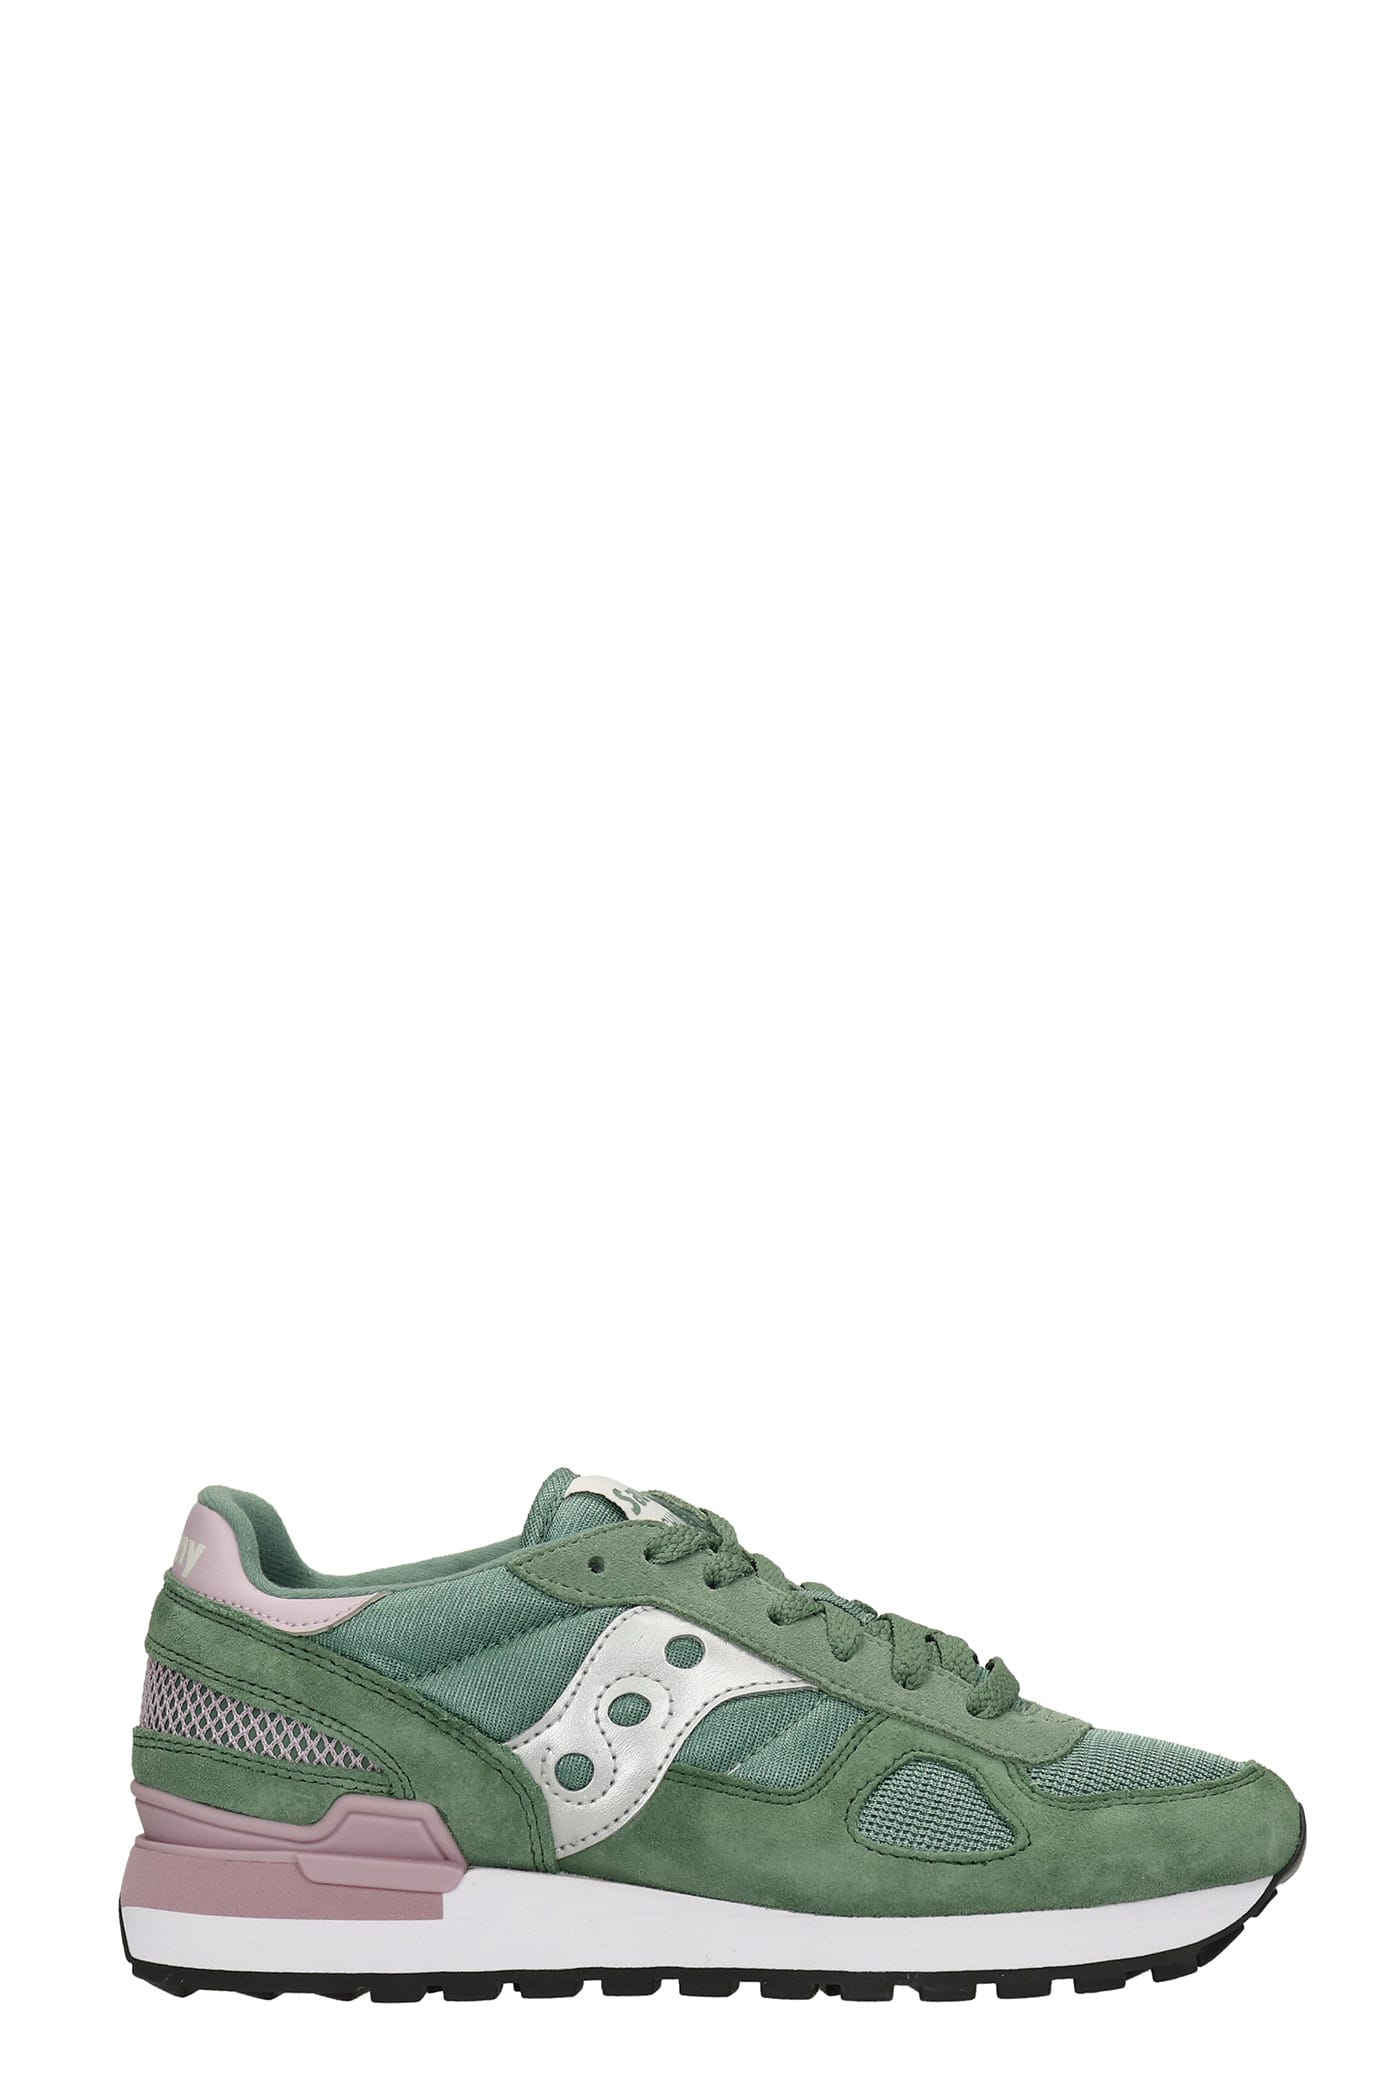 Saucony Shadow Original Sneakers In Green Suede And Fabric